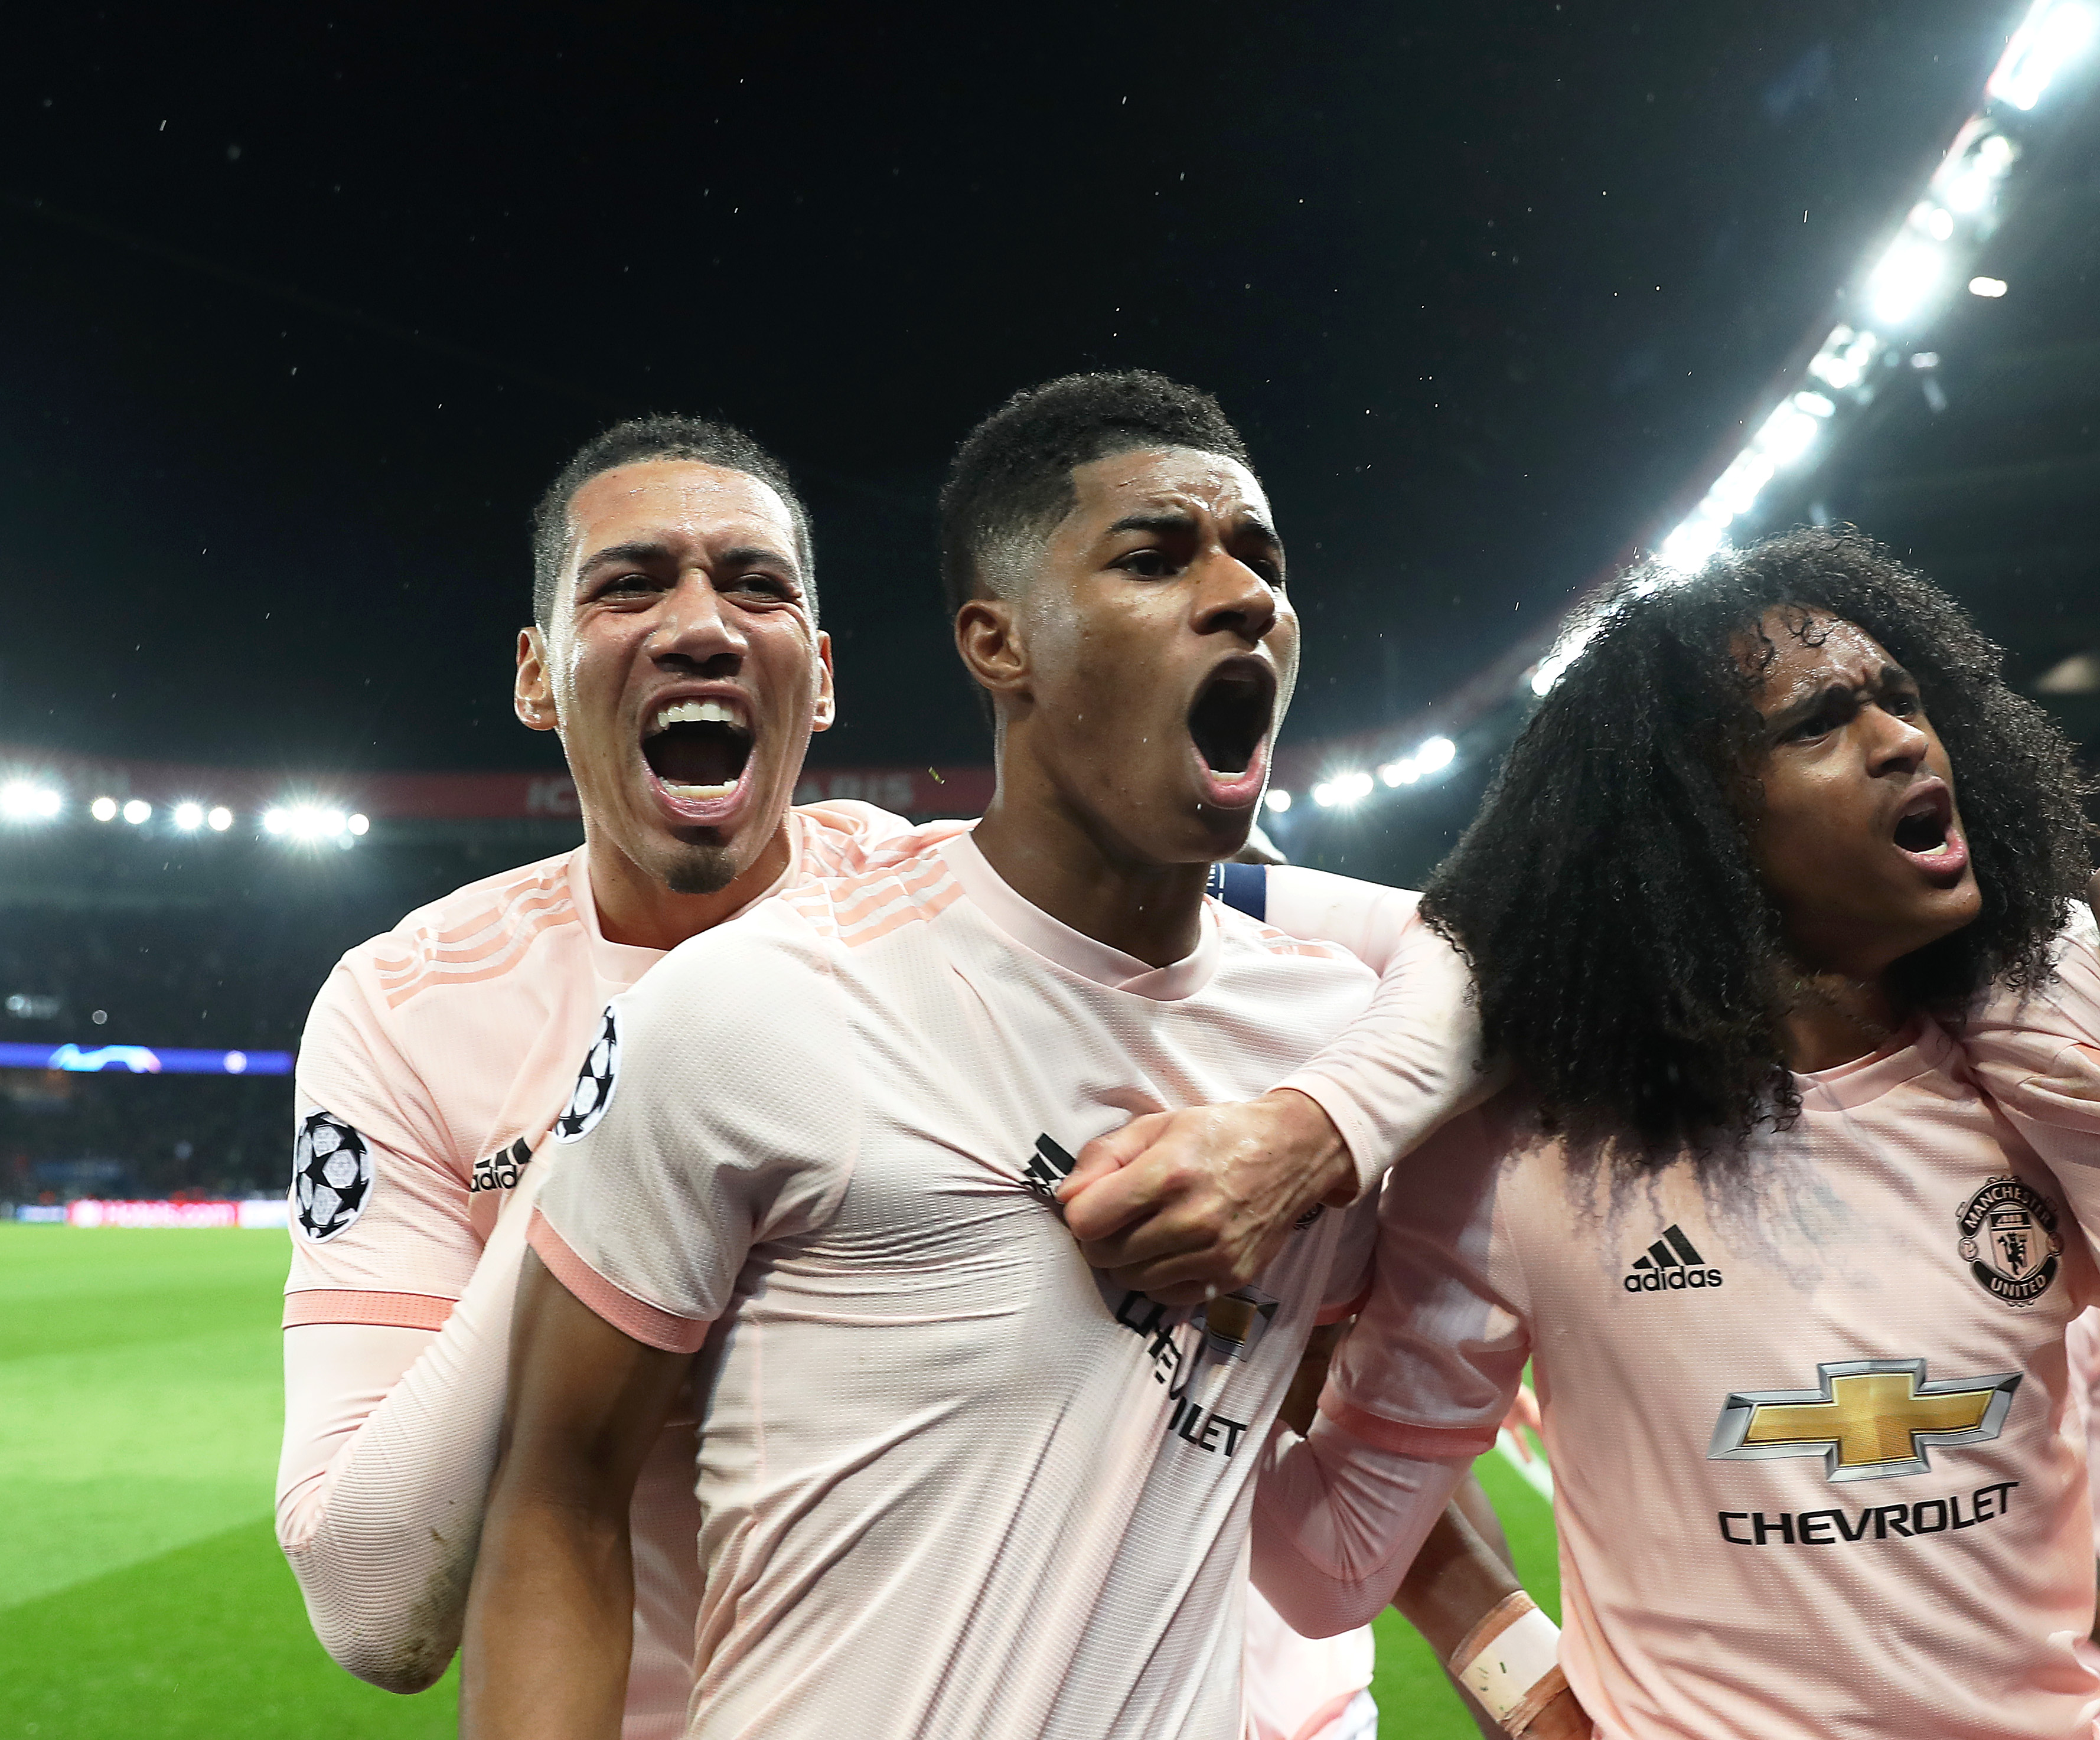 Manchester United completed an epic comeback against PSG (Photo by Julian Finney/Getty Images)